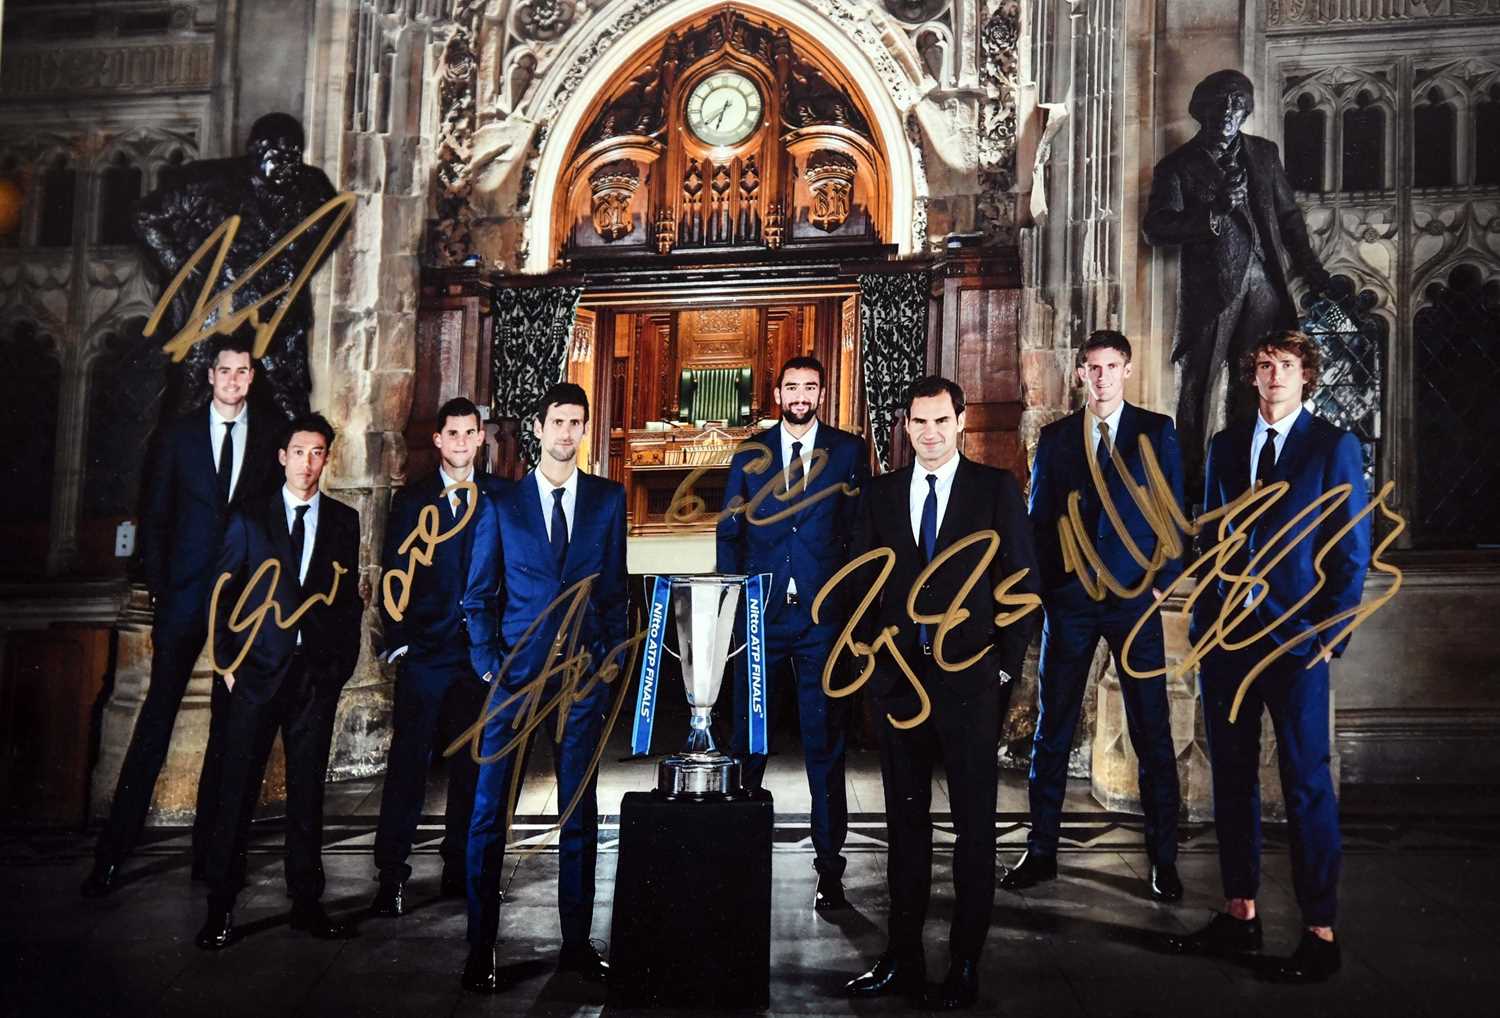 2018 ATP Tour World Tour Finalists: Framed photograph signed by all 8 players A highly remarkable